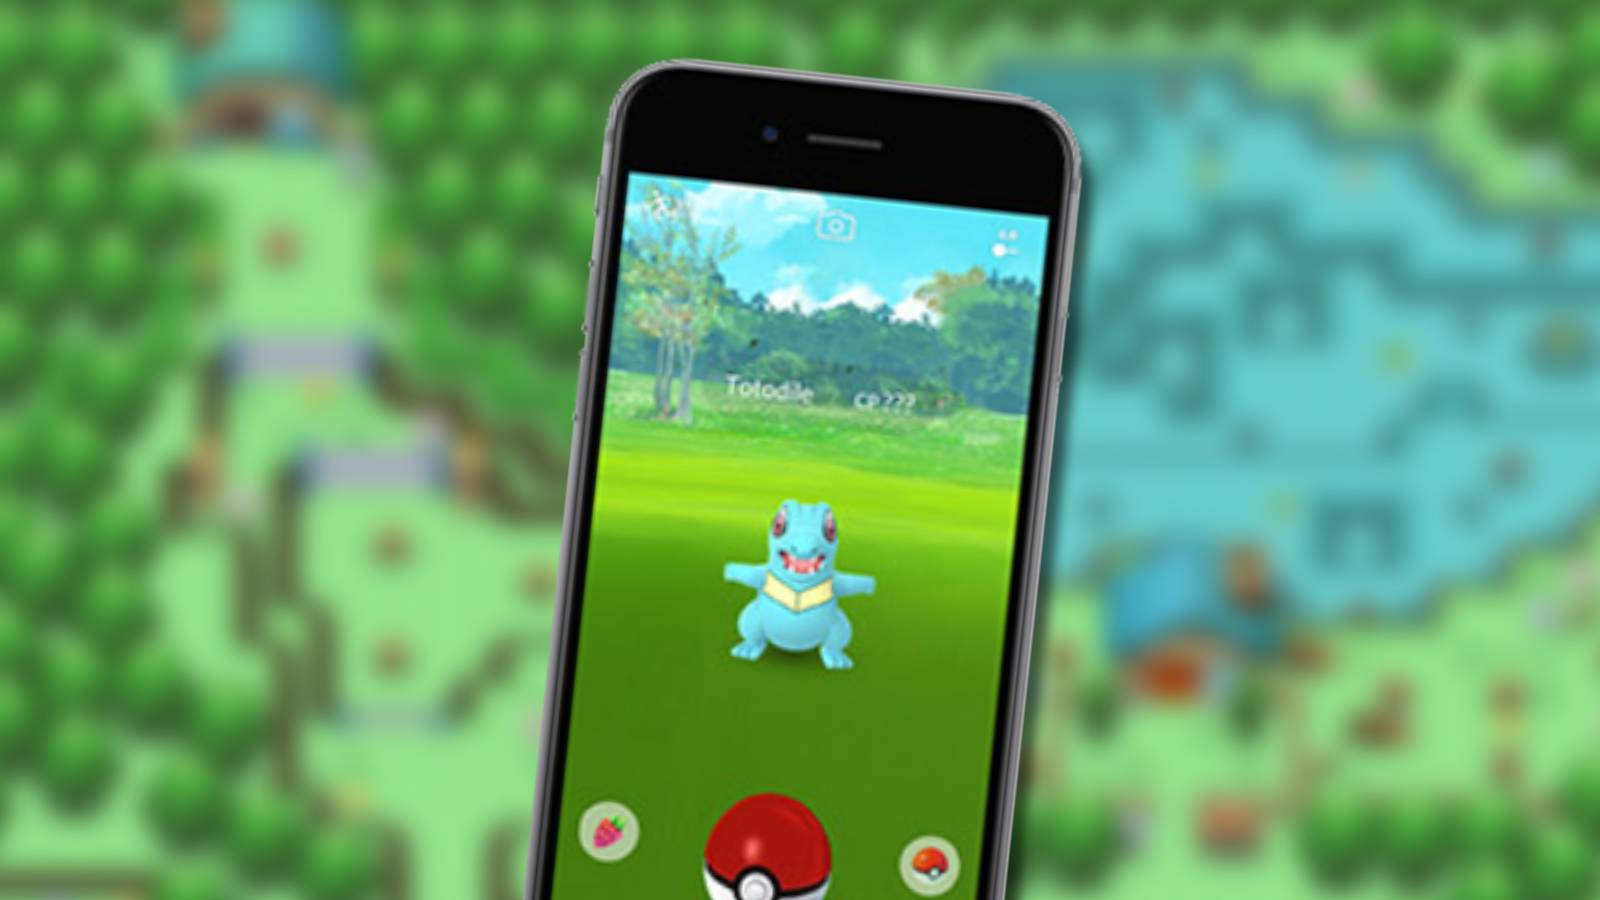 A phone appears with Pokemon Go on the screen, against a blurred background